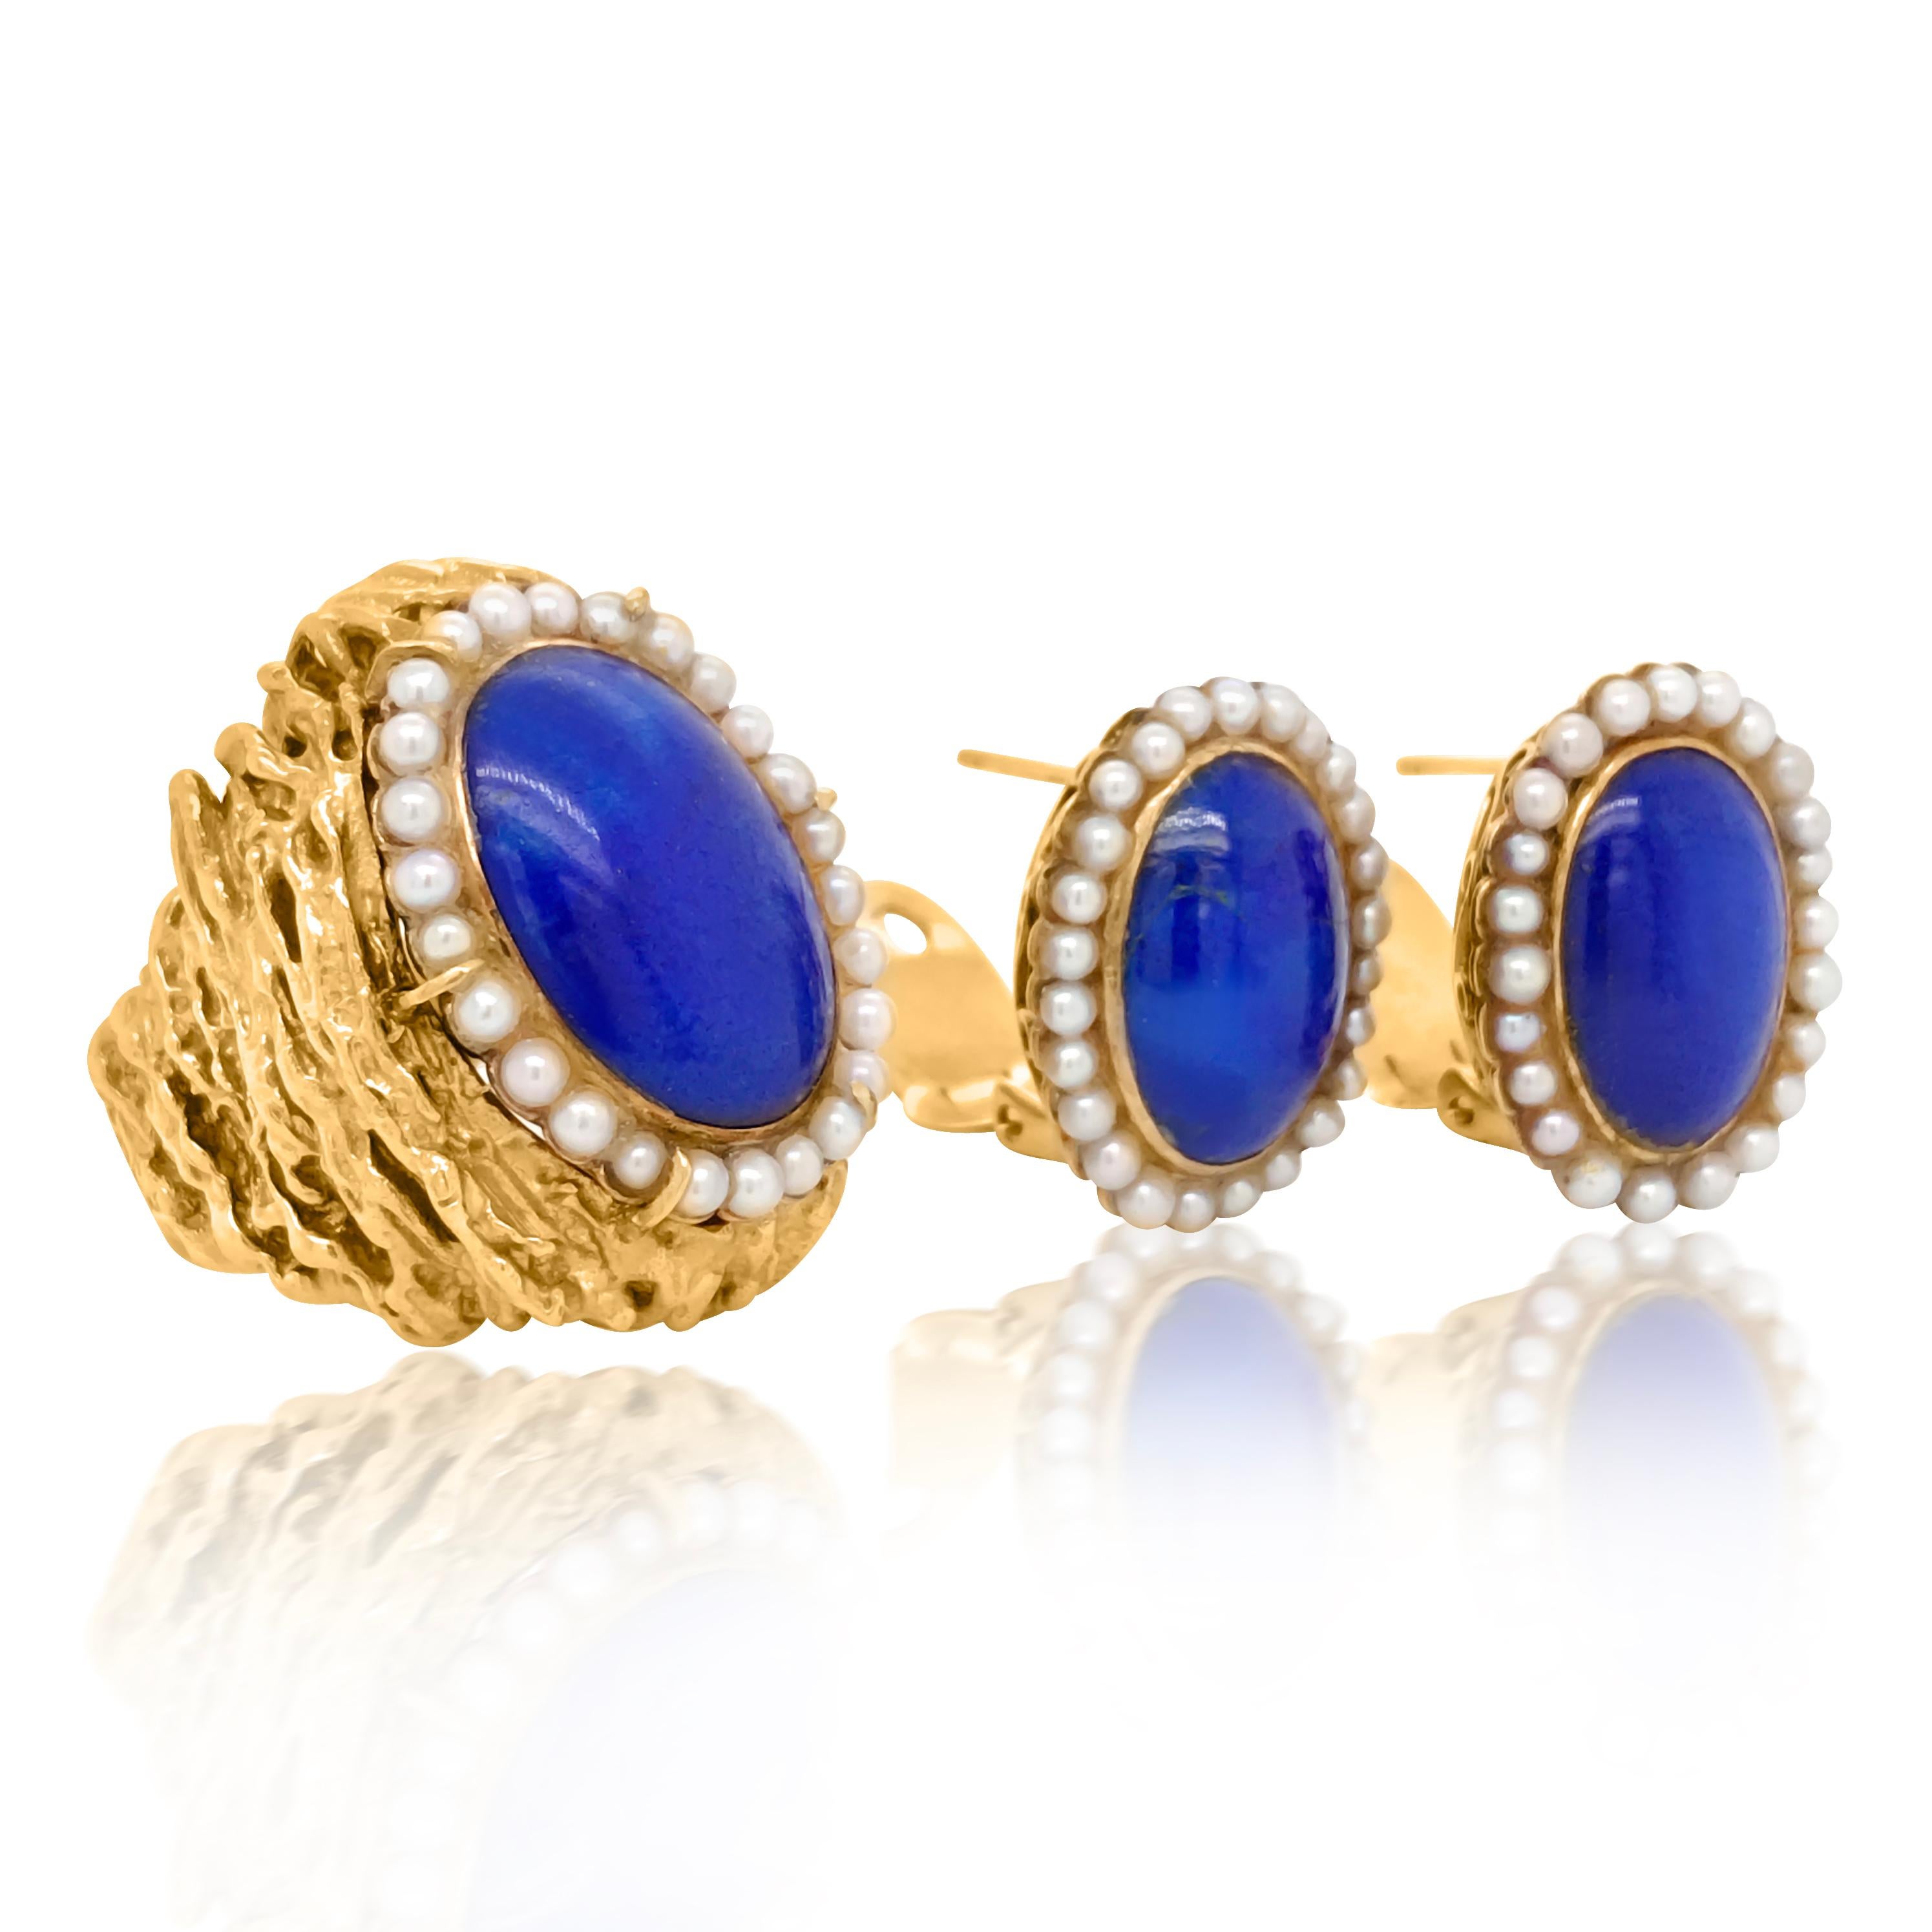 This unique and gorgeous set is consisting of a gold nugget textured ring containing one oval cabochon cut lapis lazuli measuring approximately 17.87 mm and numerous seed pearls measuring approximately 2.19mm in diameter, together with a matching